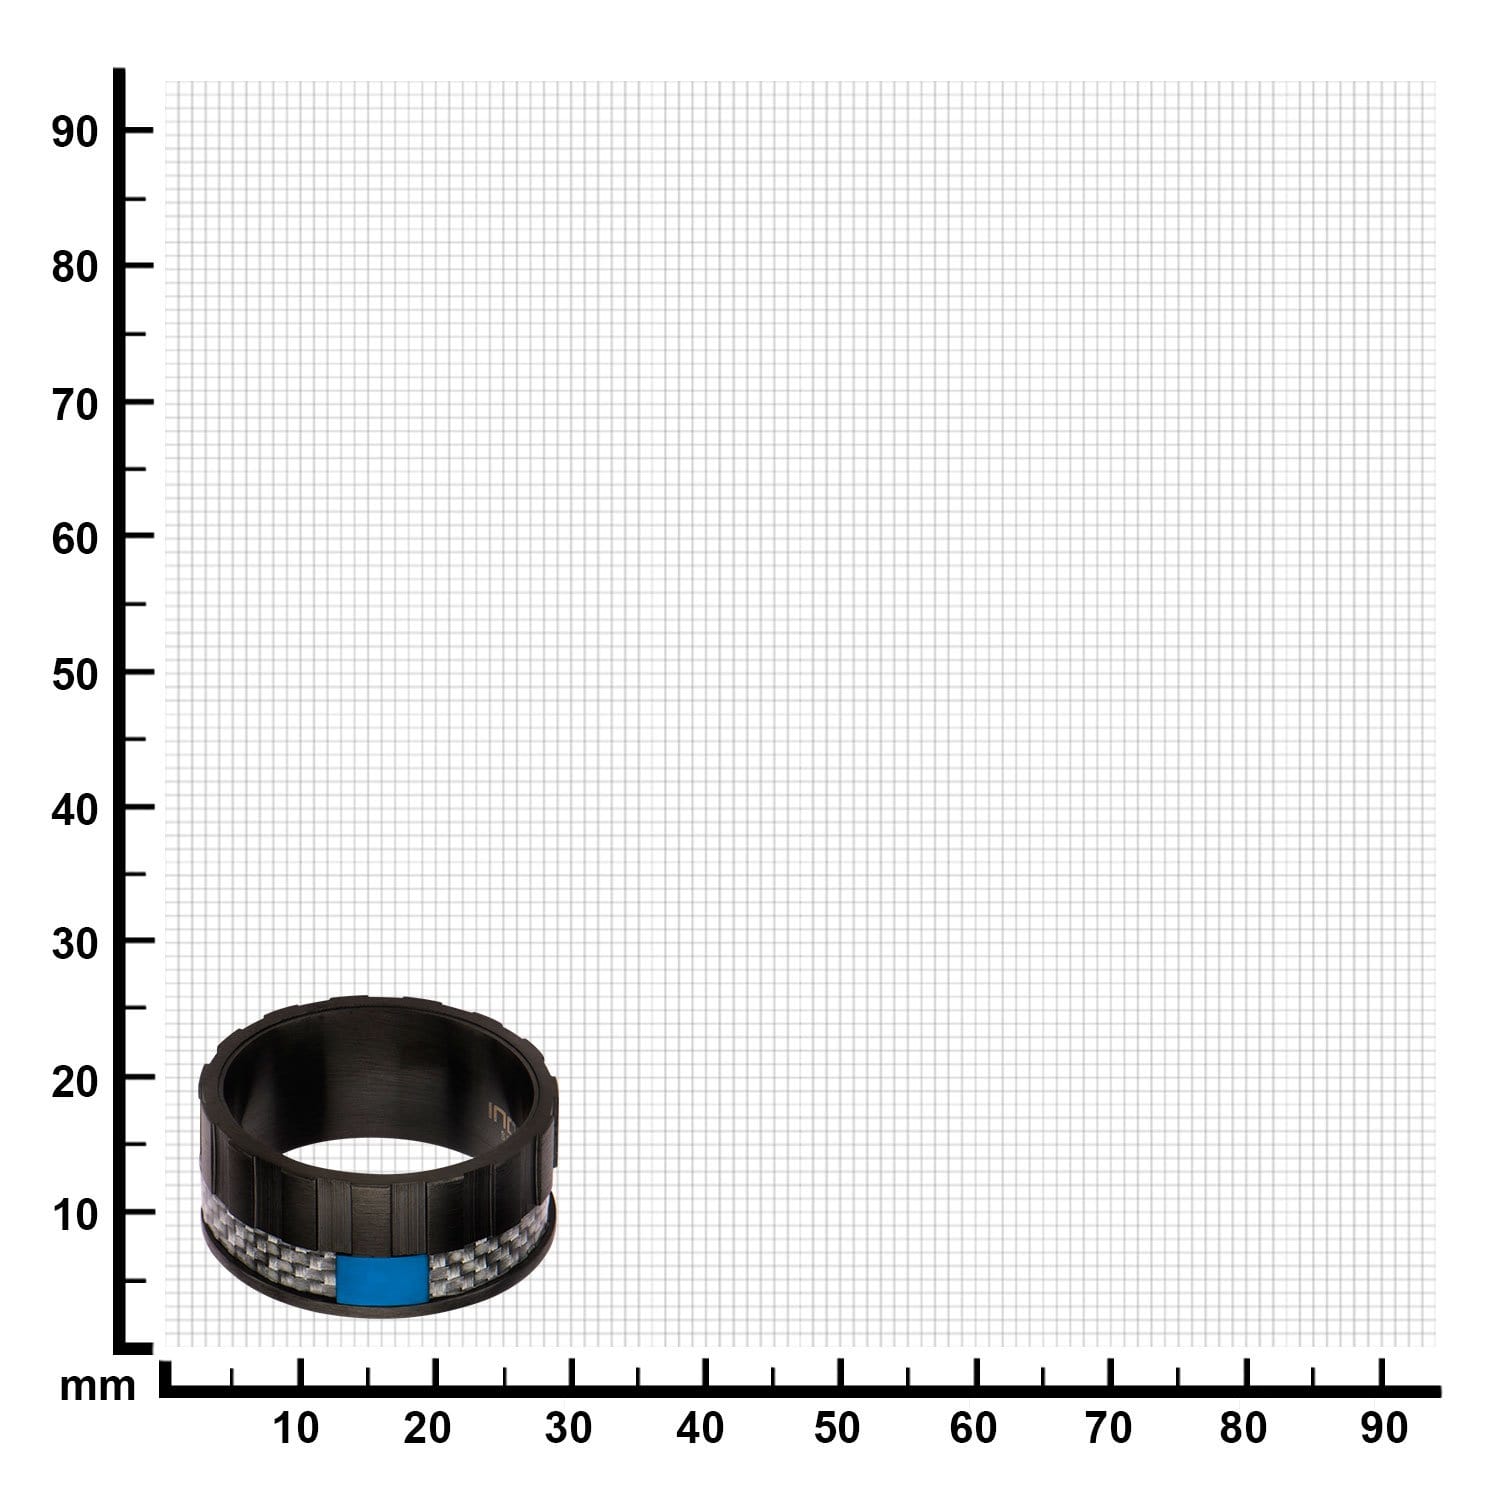 INOX JEWELRY Rings Blue and Black Stainless Steel with Gray Carbon Fiber Banded Block Ring